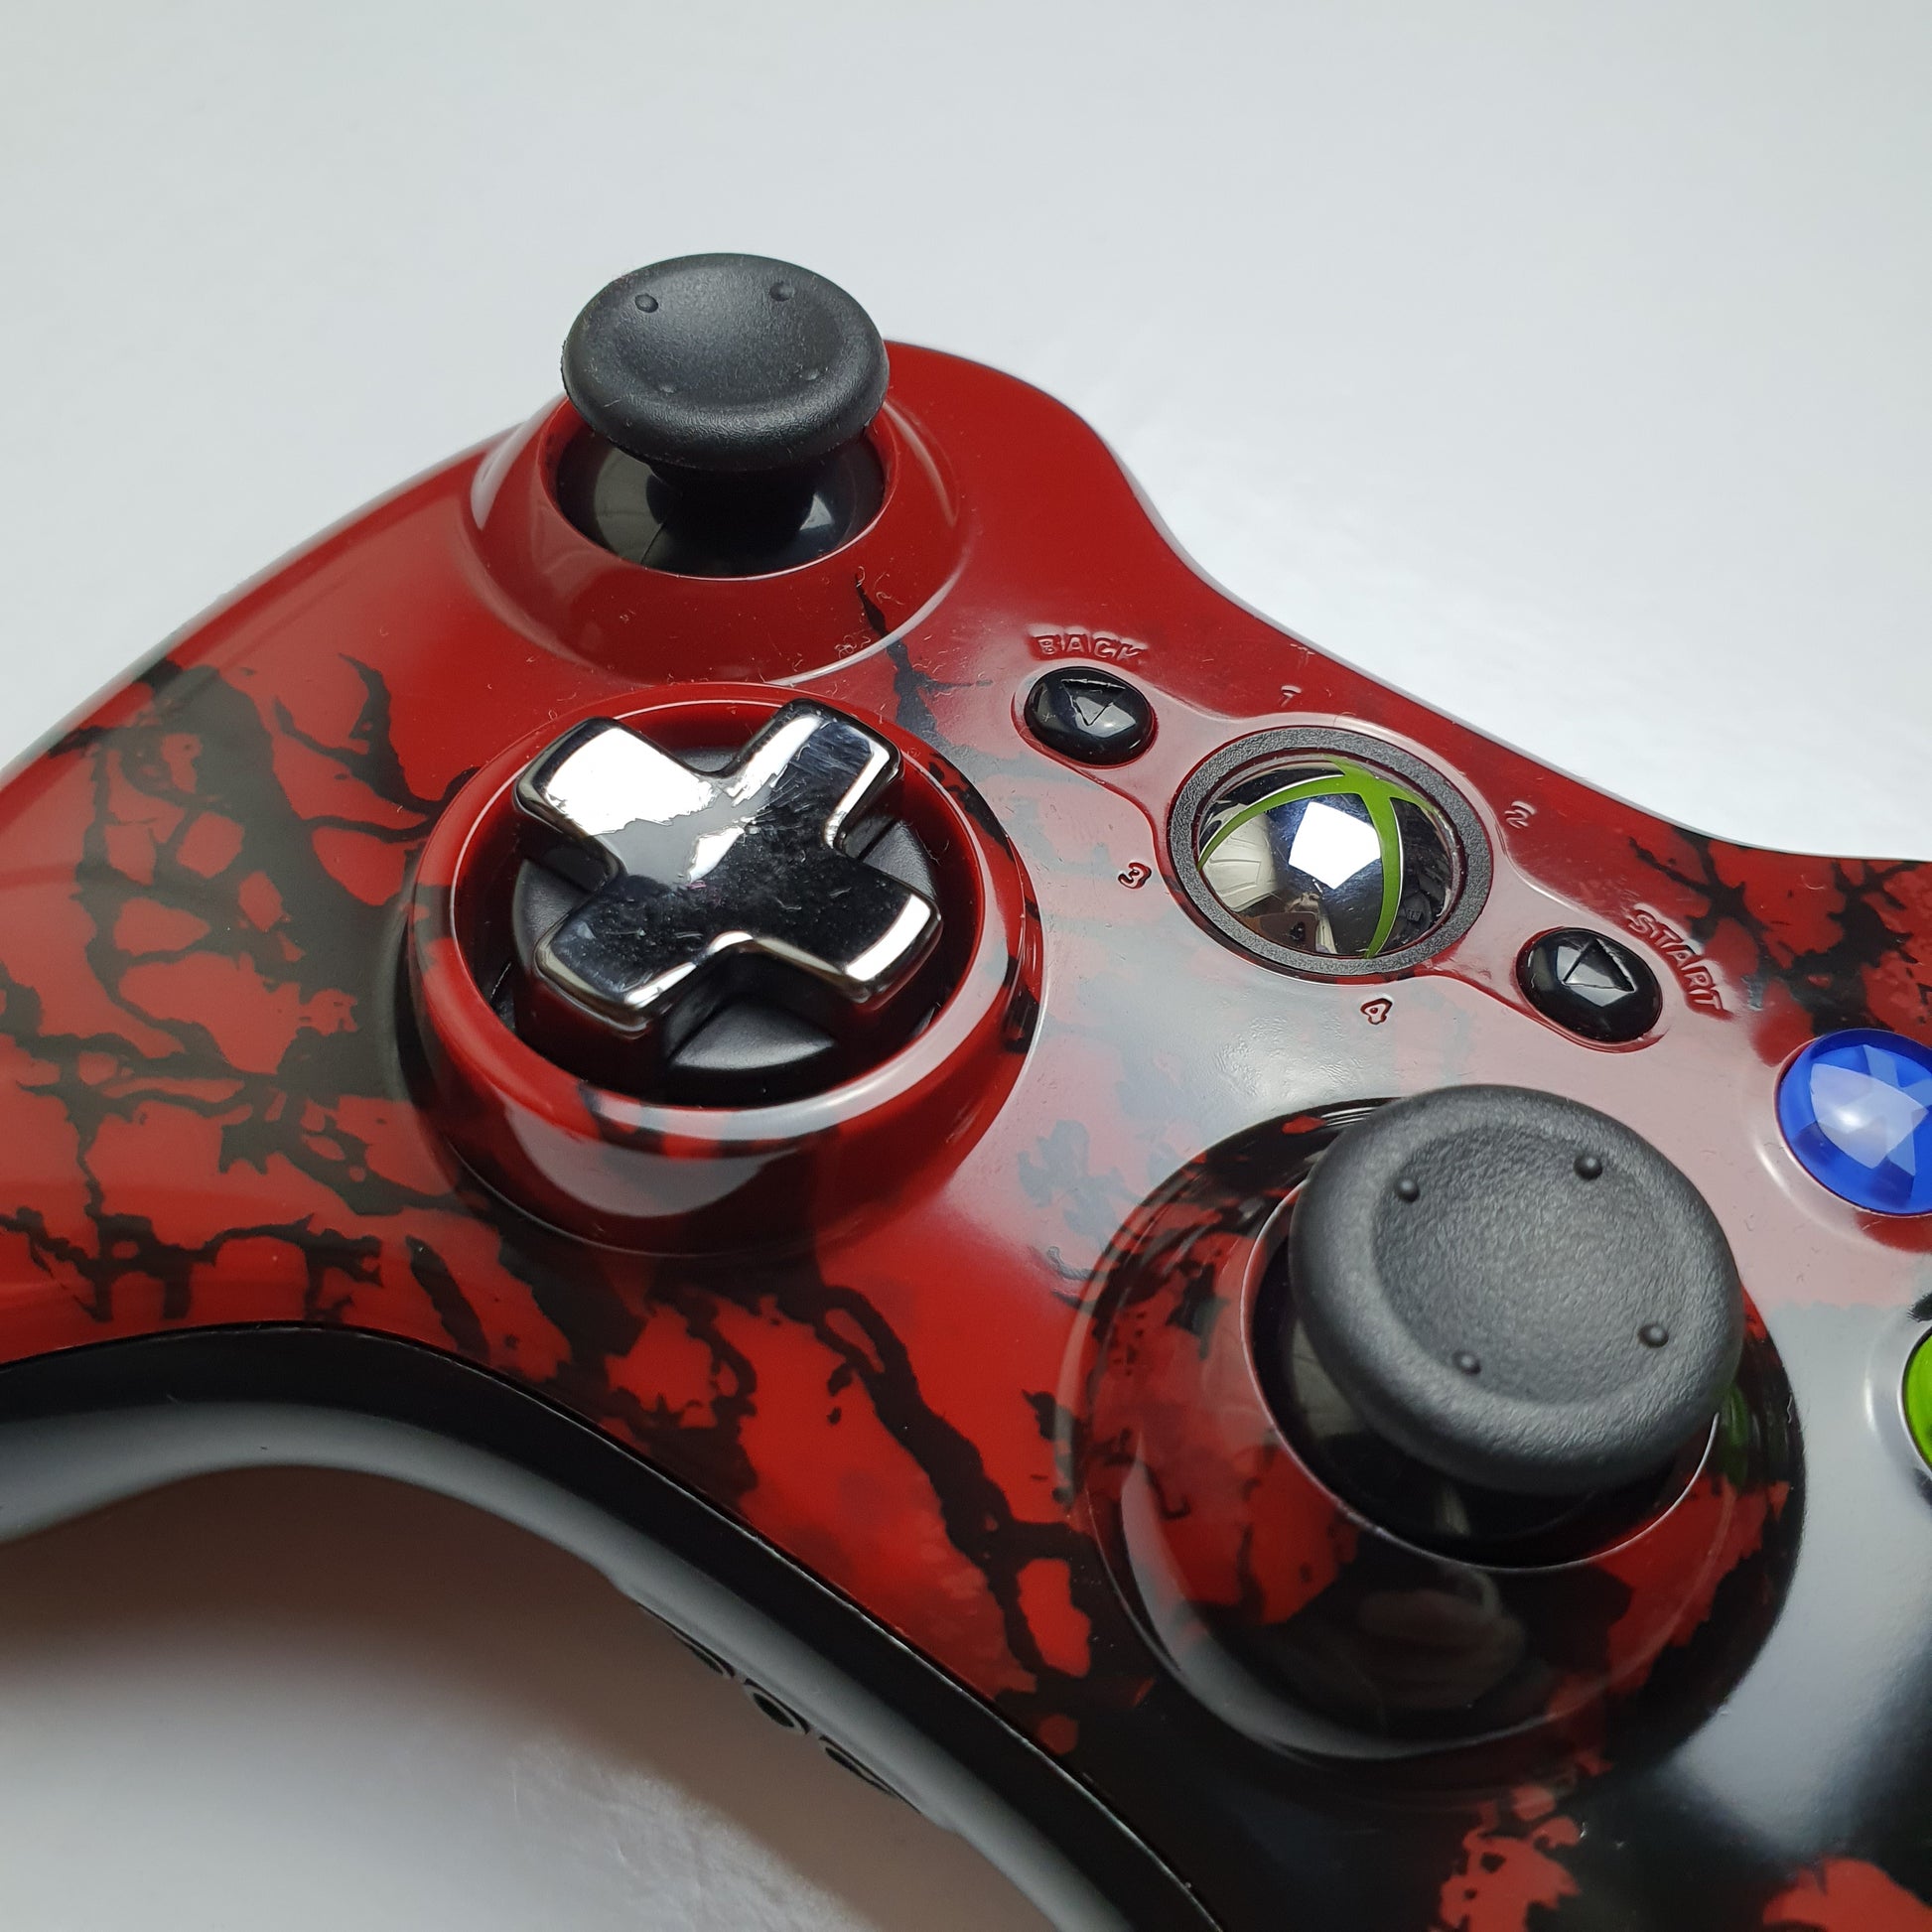 Gears of War 3 Controller - Xbox 360 (Special)